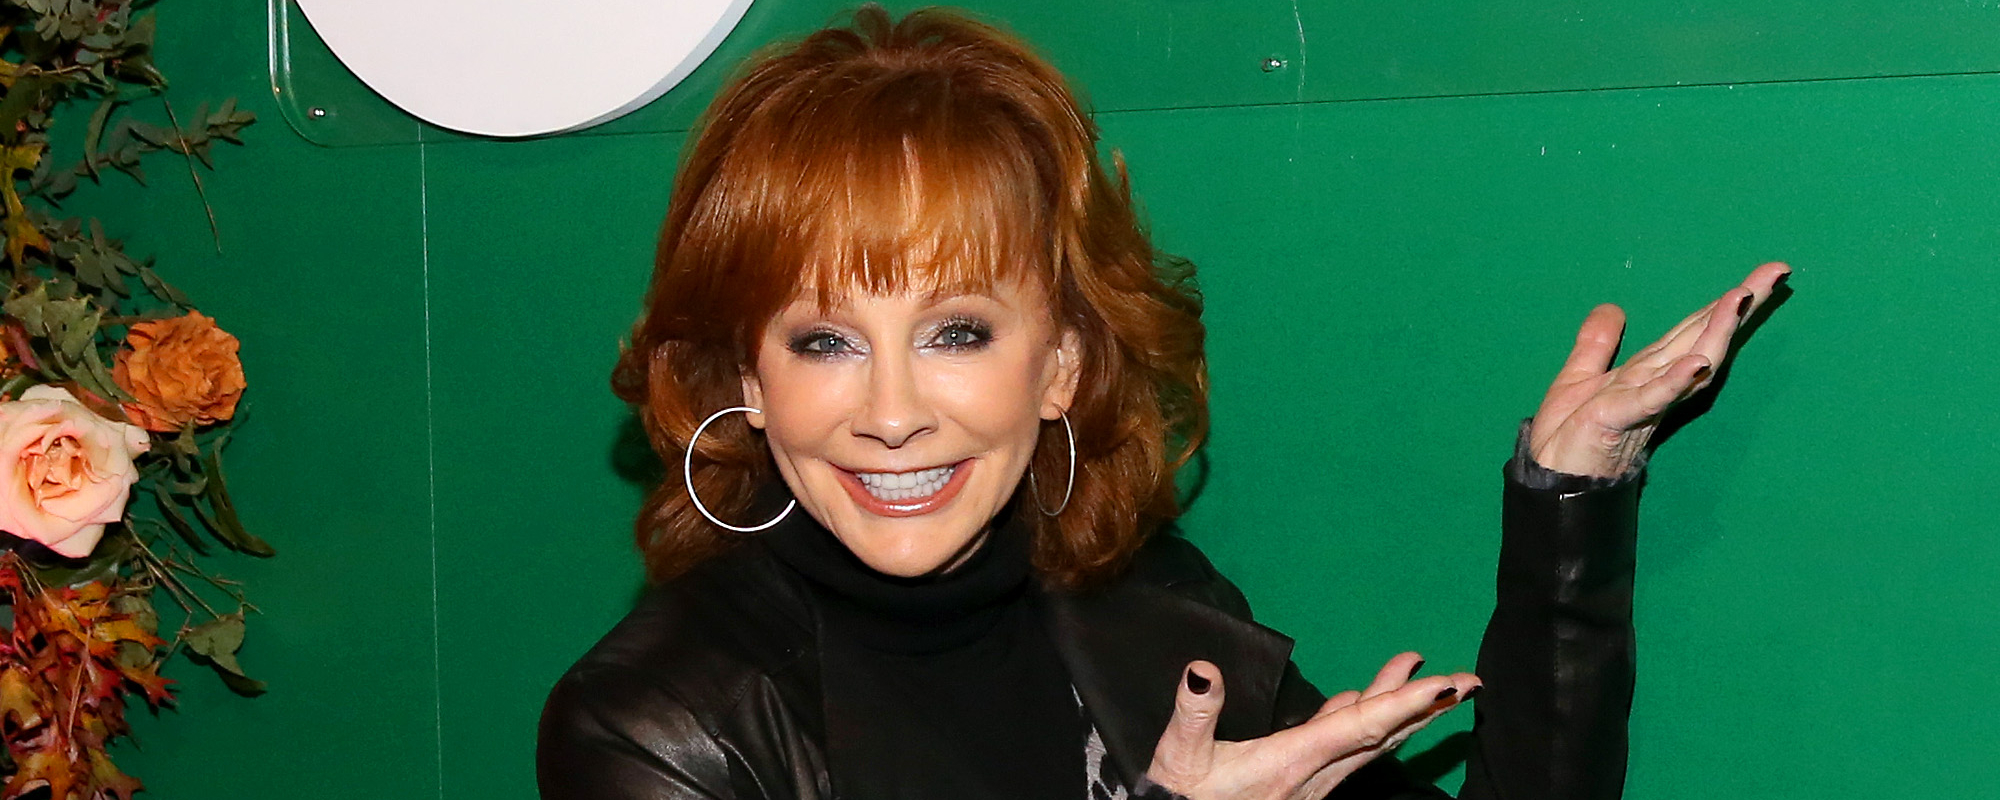 Reba McEntire in Awe of the New Wave of Singers, Says “I Doubt I Would’ve Made It Out of Oklahoma” Nowadays